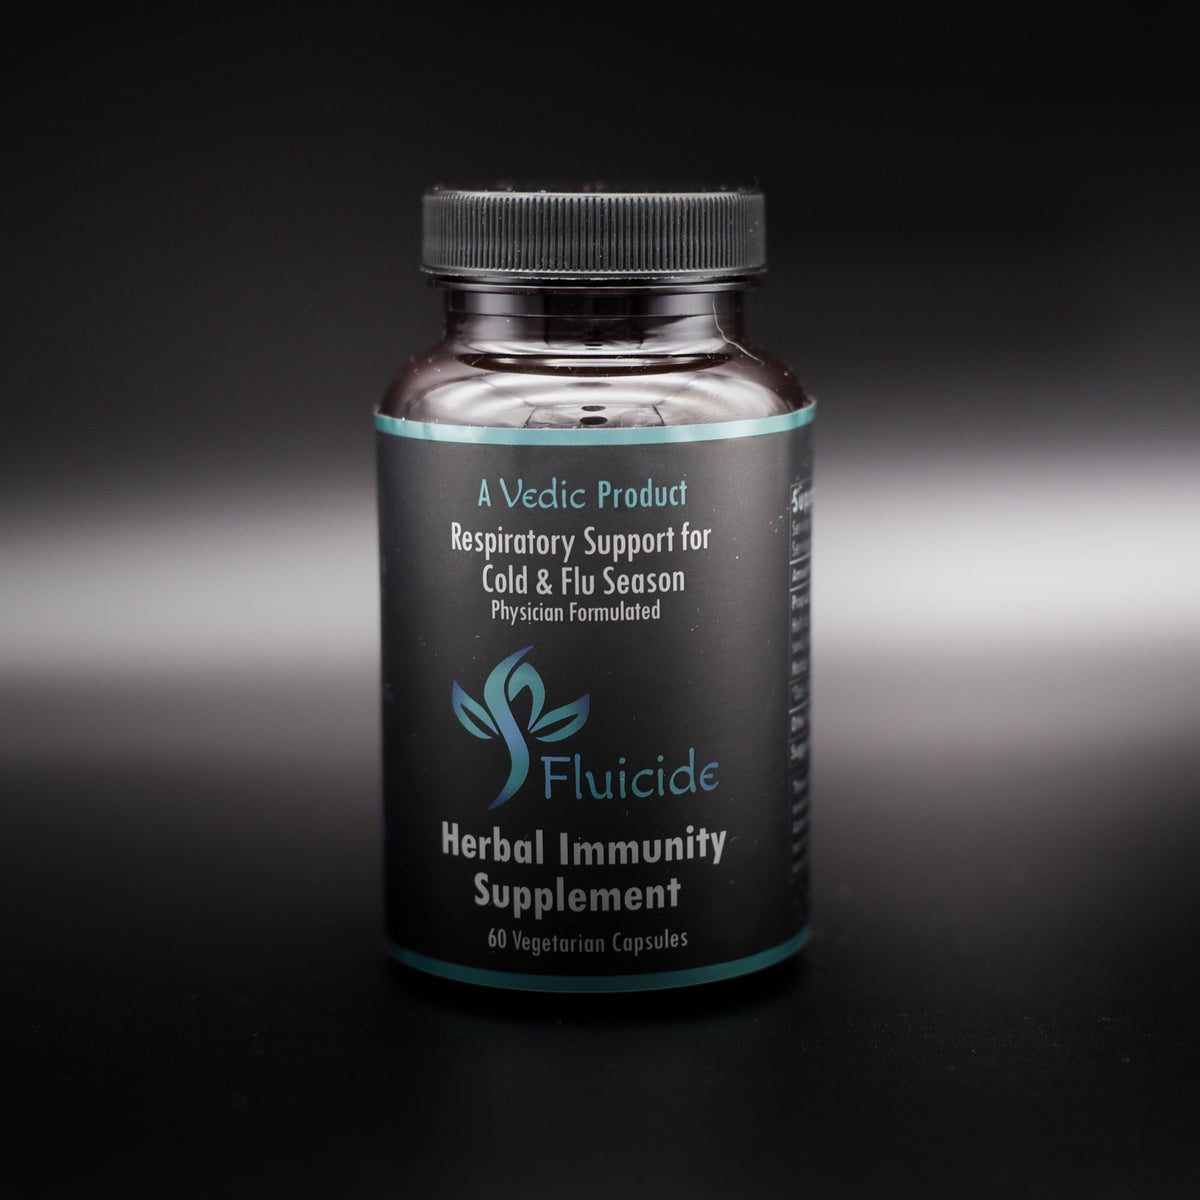 Fluicide Immune Booster